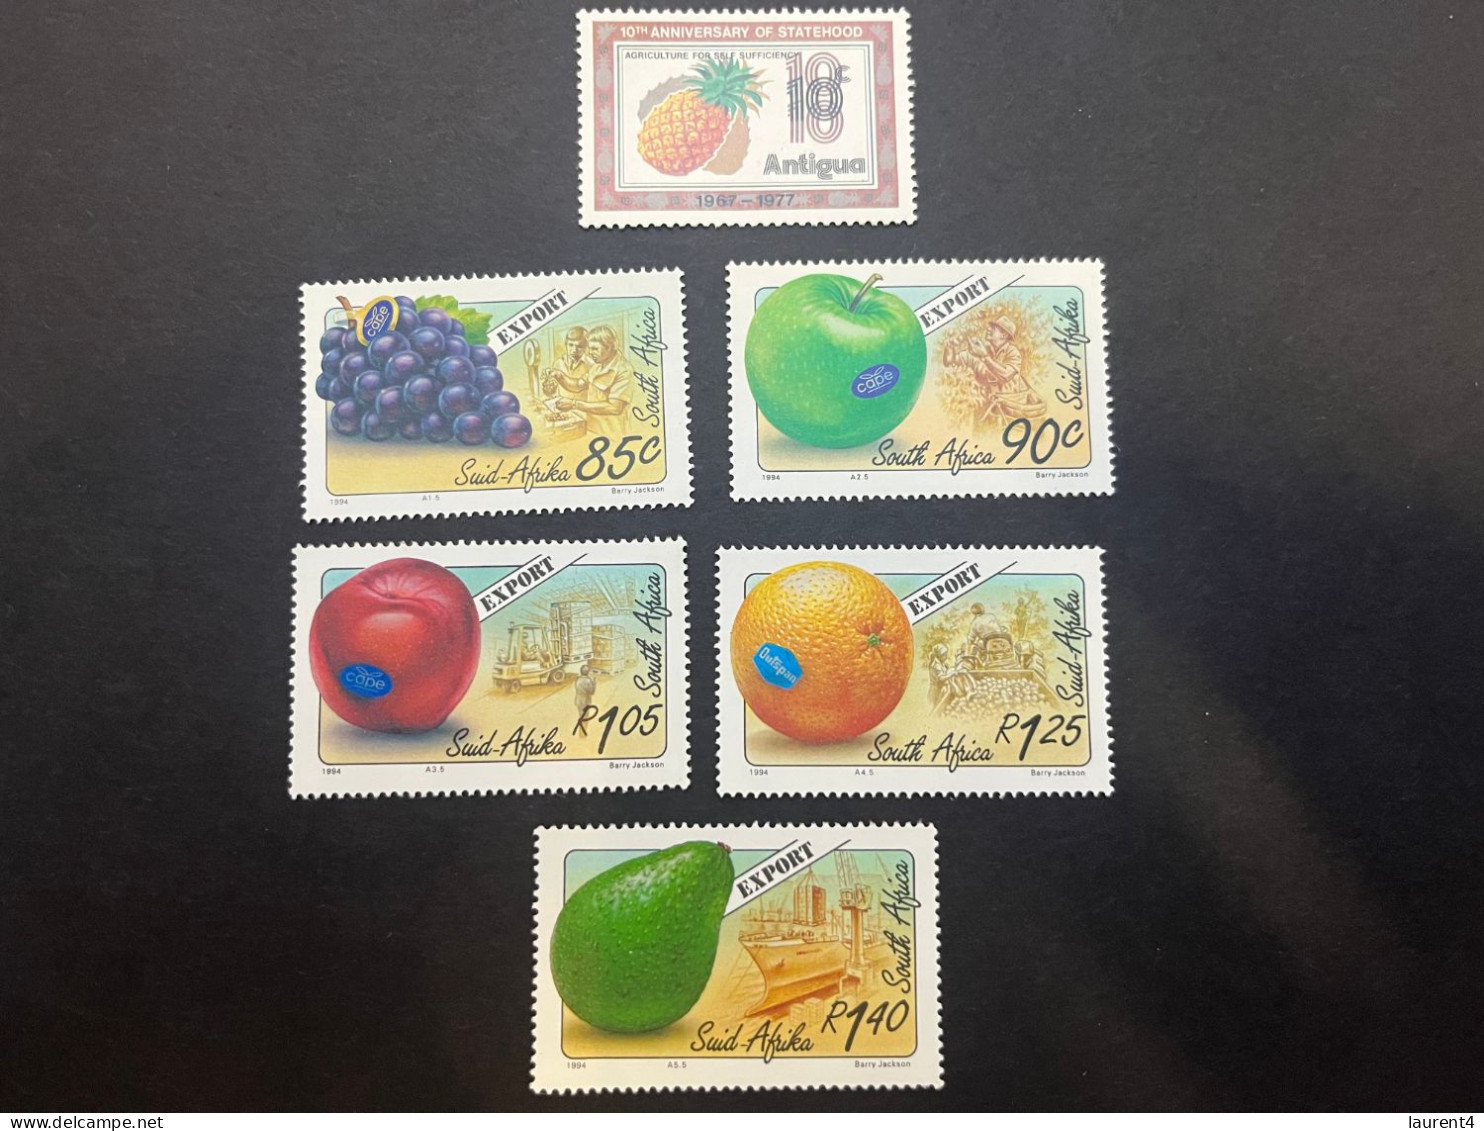 16-5-2024 (stamp) South Africa - 5 Mint Fruits Stamps (+ 1 From Antigua) - Ongebruikt